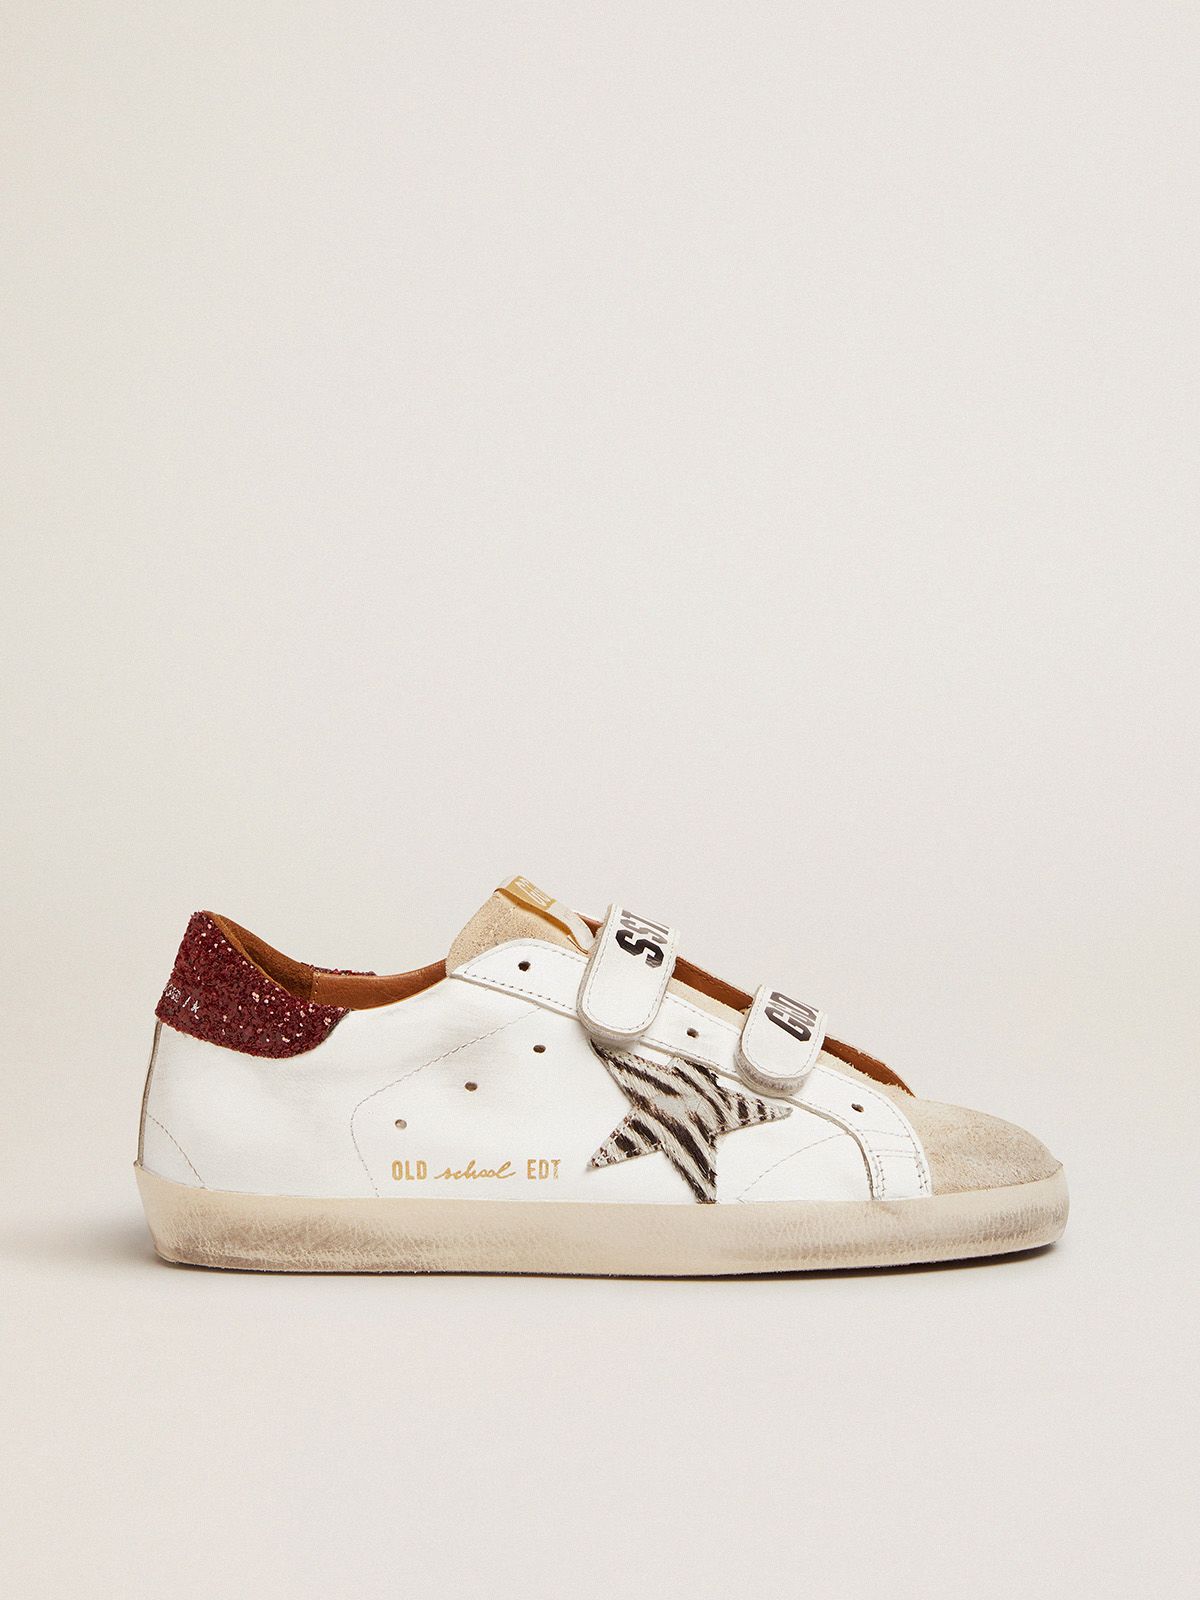 Sneakers Uomo Golden Goose Old School sneakers with zebra-print pony skin star and red glitter heel tab